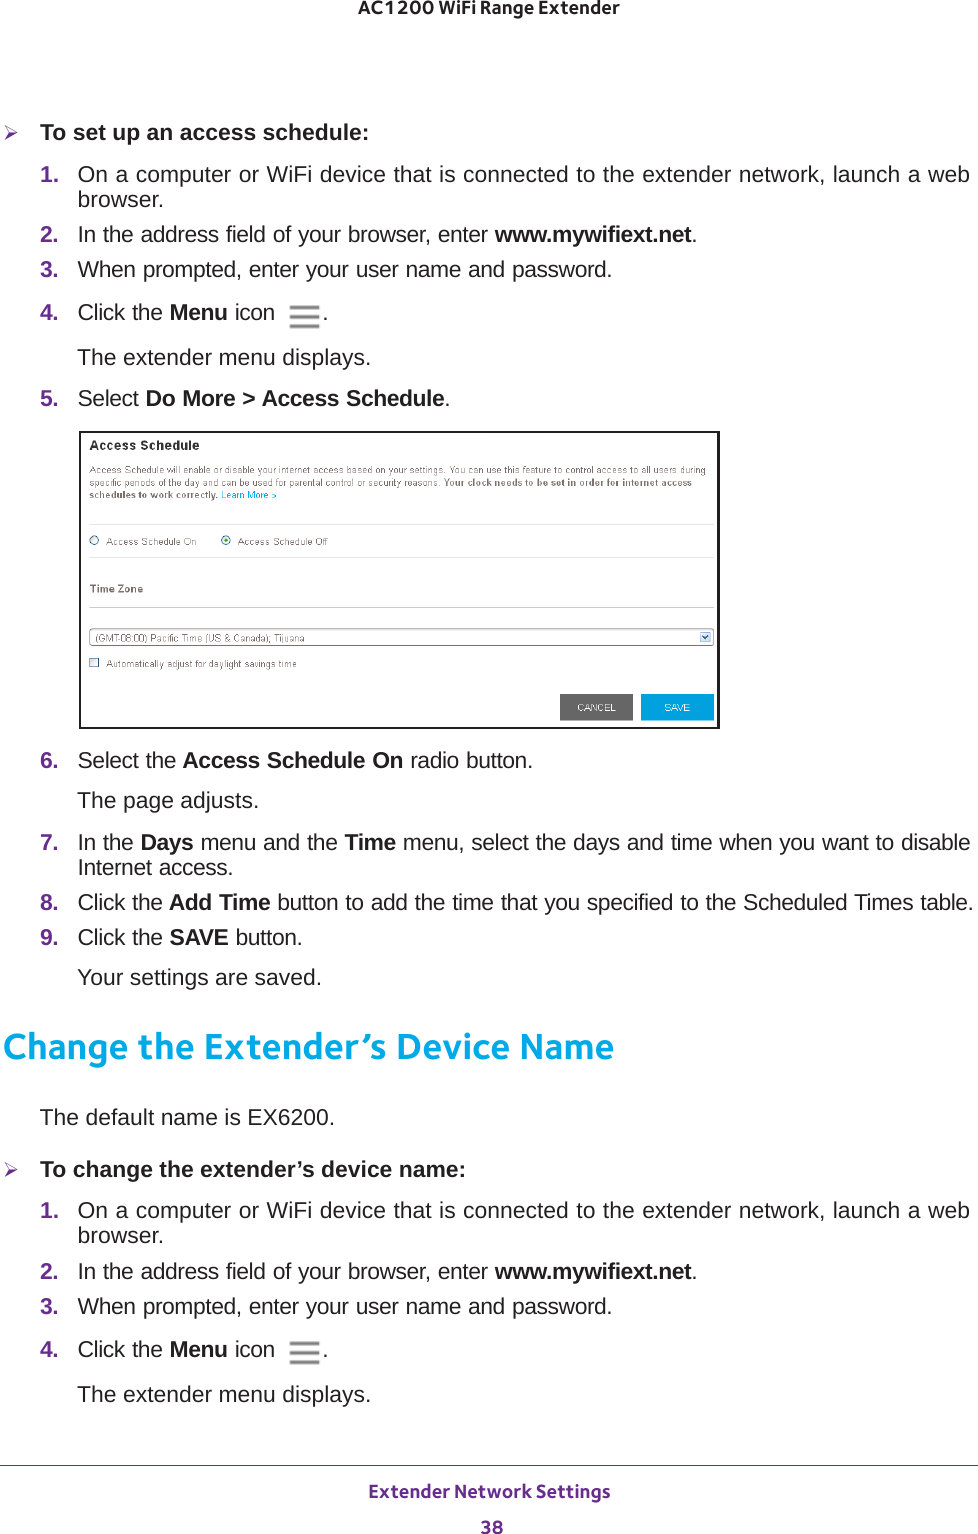 Extender Network Settings 38AC1200 WiFi Range Extender To set up an access schedule:1.  On a computer or WiFi device that is connected to the extender network, launch a web browser. 2.  In the address field of your browser, enter www.mywifiext.net. 3.  When prompted, enter your user name and password.4.  Click the Menu icon  .The extender menu displays.5.  Select Do More &gt; Access Schedule.6.  Select the Access Schedule On radio button.The page adjusts.7.  In the Days menu and the Time menu, select the days and time when you want to disable Internet access.8.  Click the Add Time button to add the time that you specified to the Scheduled Times table.9.  Click the SAVE button.Your settings are saved.Change the Extender’s Device NameThe default name is EX6200.To change the extender’s device name:1.  On a computer or WiFi device that is connected to the extender network, launch a web browser. 2.  In the address field of your browser, enter www.mywifiext.net. 3.  When prompted, enter your user name and password.4.  Click the Menu icon  .The extender menu displays.